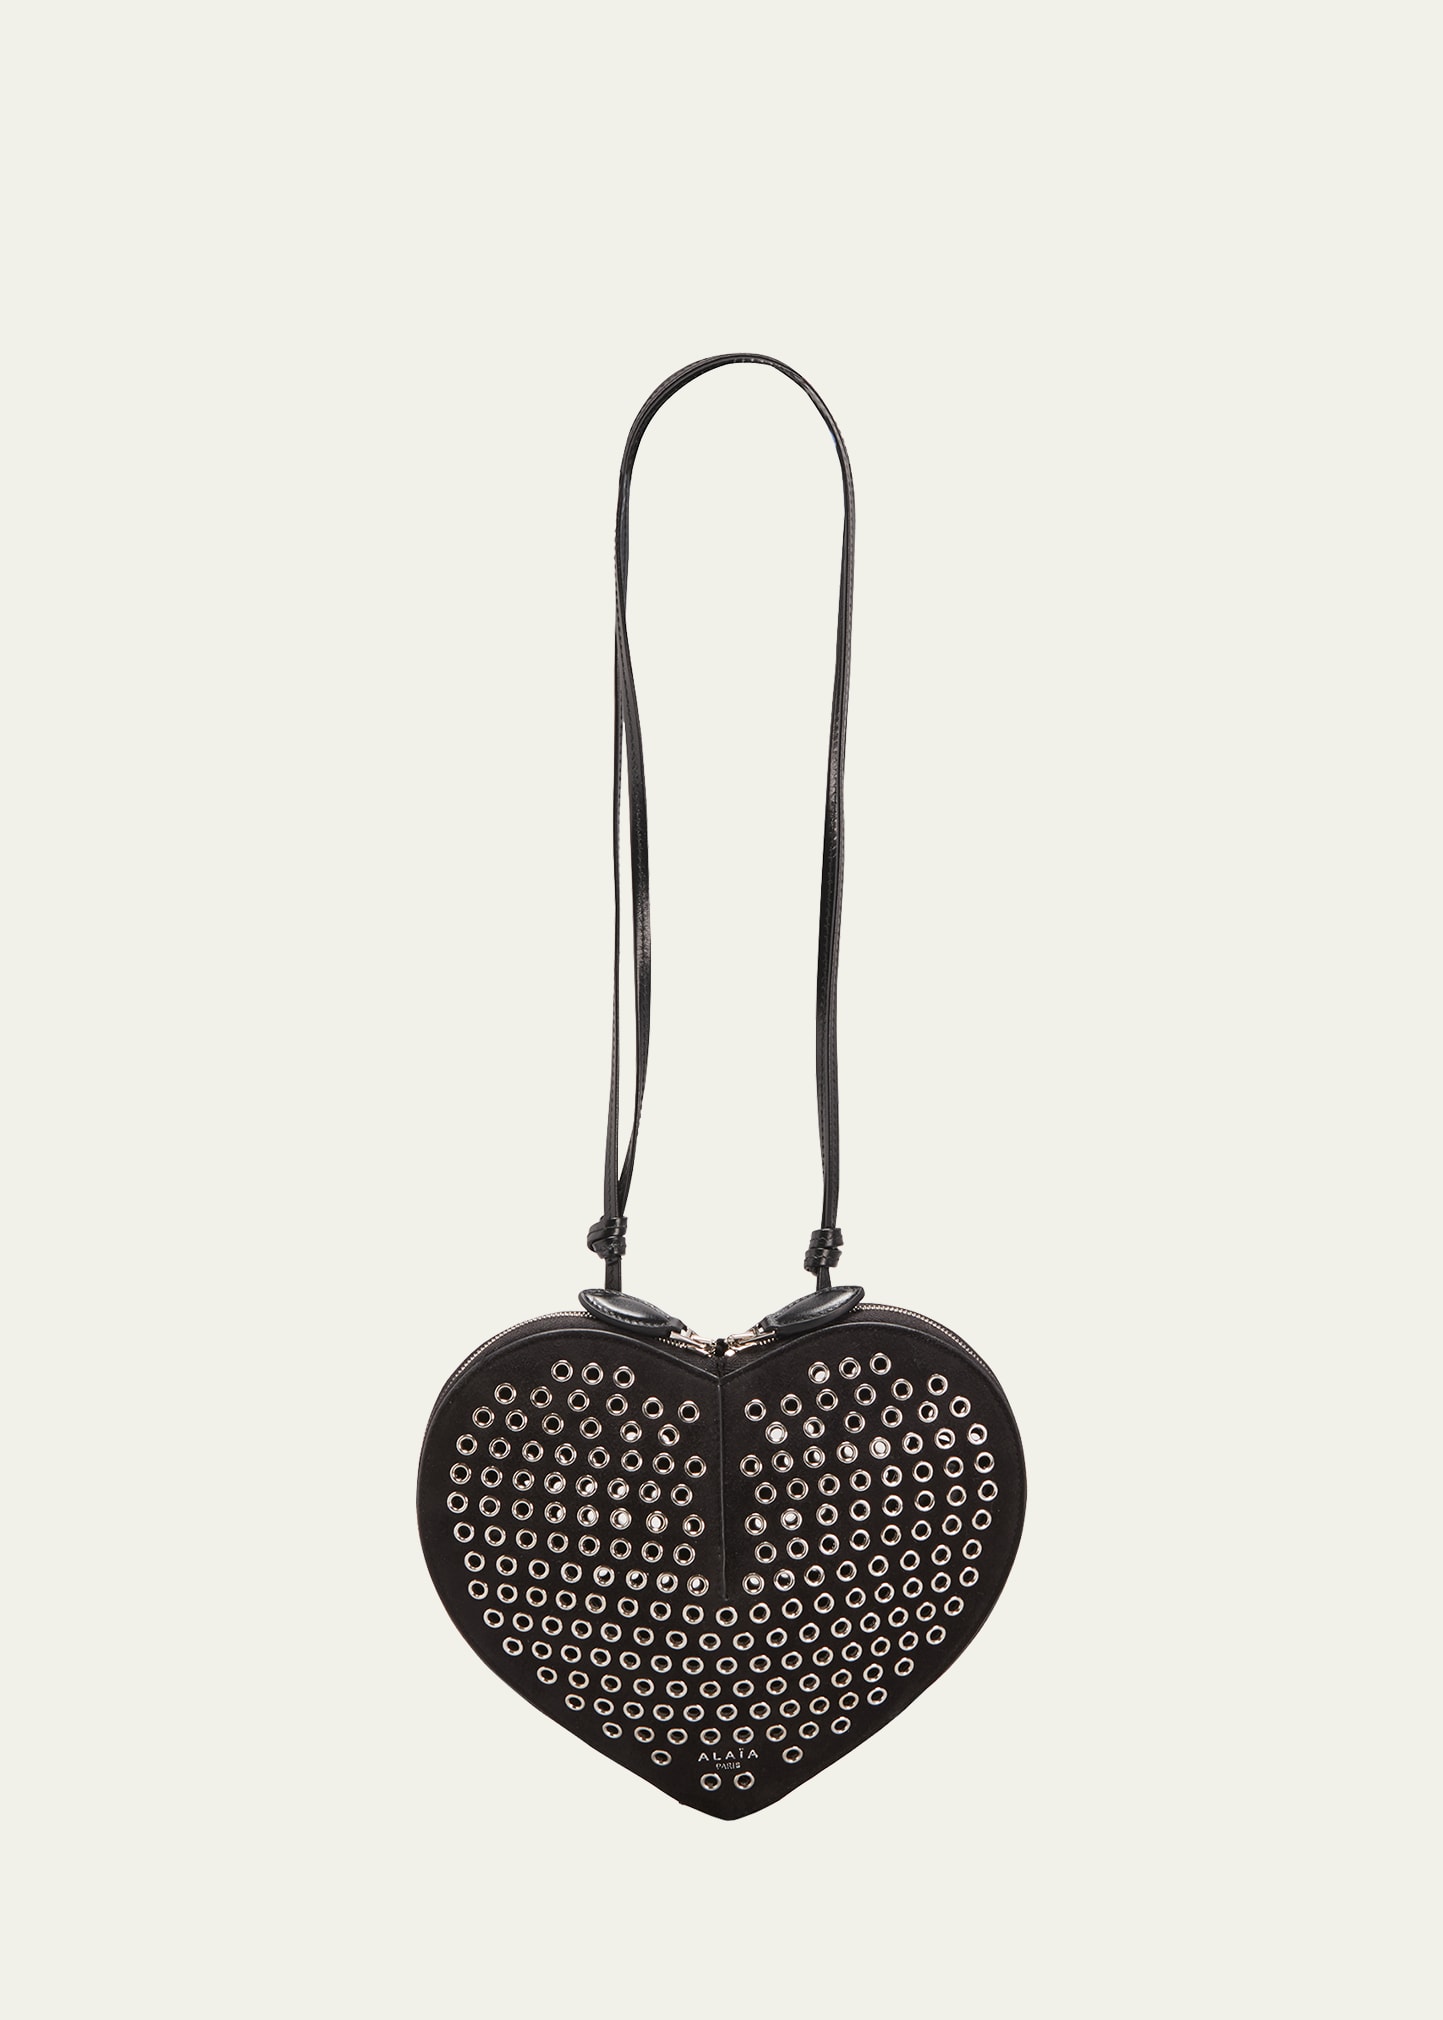 Le Coeur Crossbody Bag in Lux Leather with Grommets